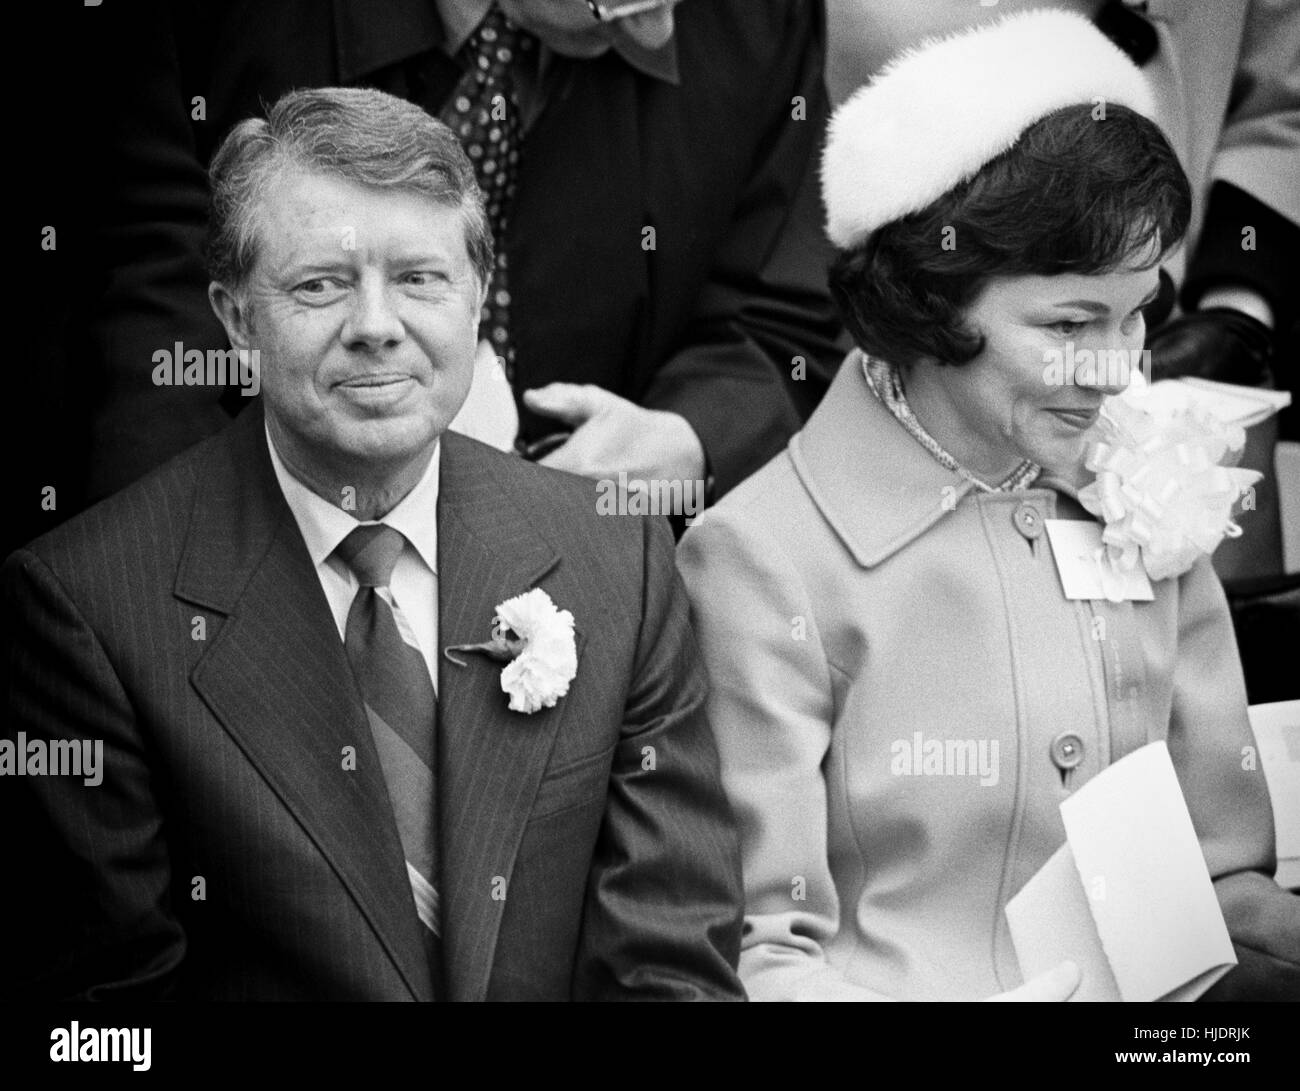 Georgia state senator and governor elect Jimmy Carter at his 1971 gubernatorial inauguration. Carter succeeded segregationist Lester Maddox as Georgia governor. Carter is seated with his wife Rosalyn and daughter Amy. Stock Photo